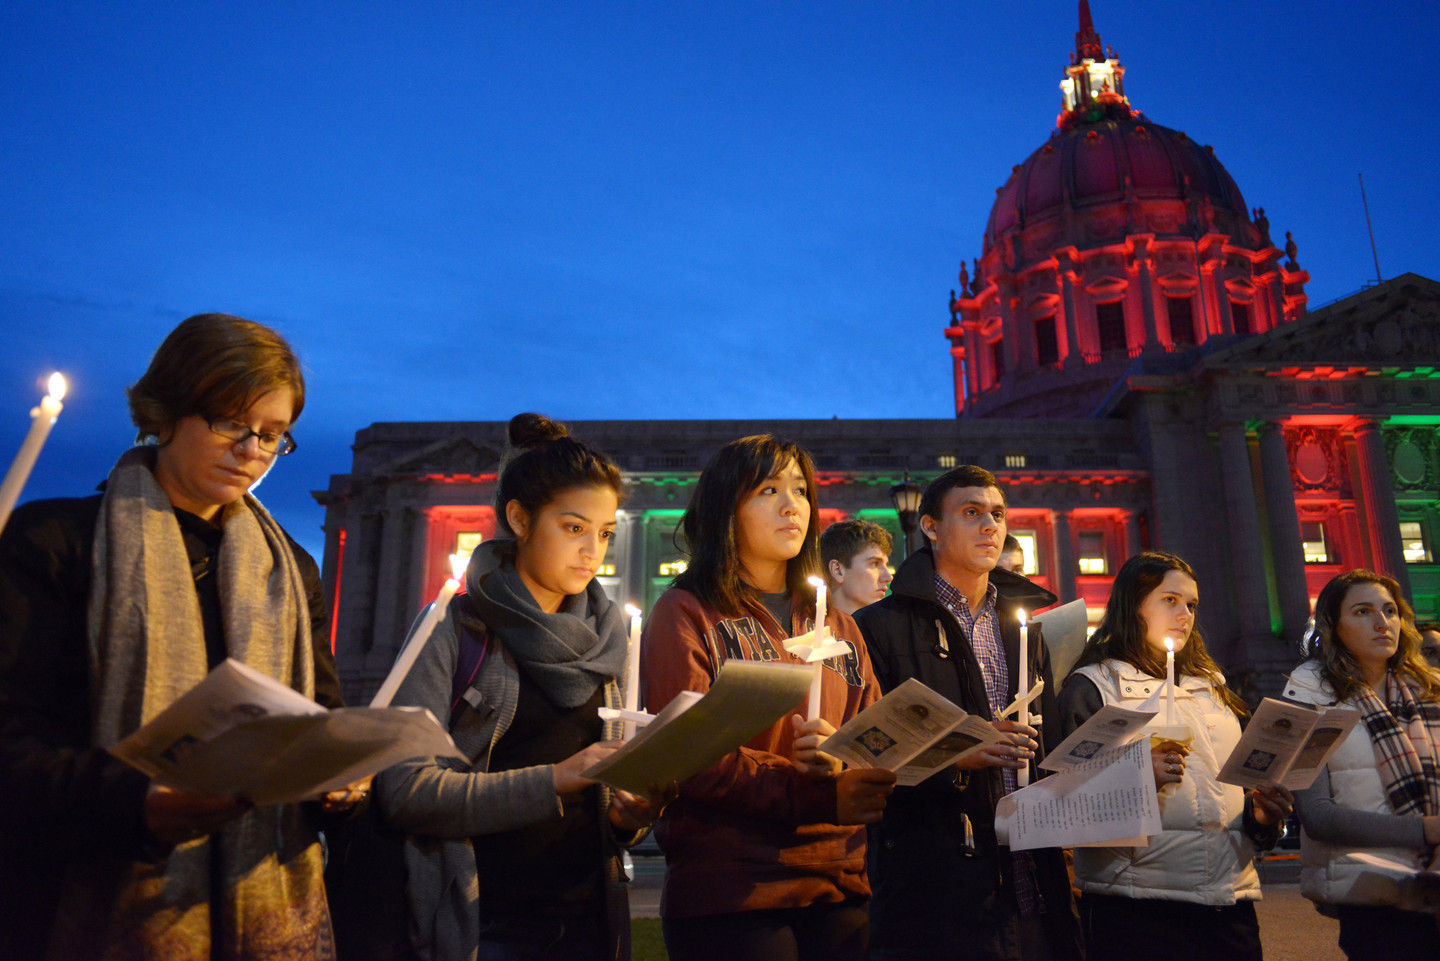 A line of six people, all presenting as white or Asian, hold a long, white, lit candle in one hand and what seems to be a paper program in the other. Some look down at the program, and others look up at a focal point beyond and to the left of the camera. Behind them is the south half of the facade of San Francisco City Hall (facing what would be the plaza), the rotunda lit up in red, and the wall beneath it lighted in alternating columns of red and green. The sky, which takes up most of the top half of the photo, is a deep blue, as after sunset.